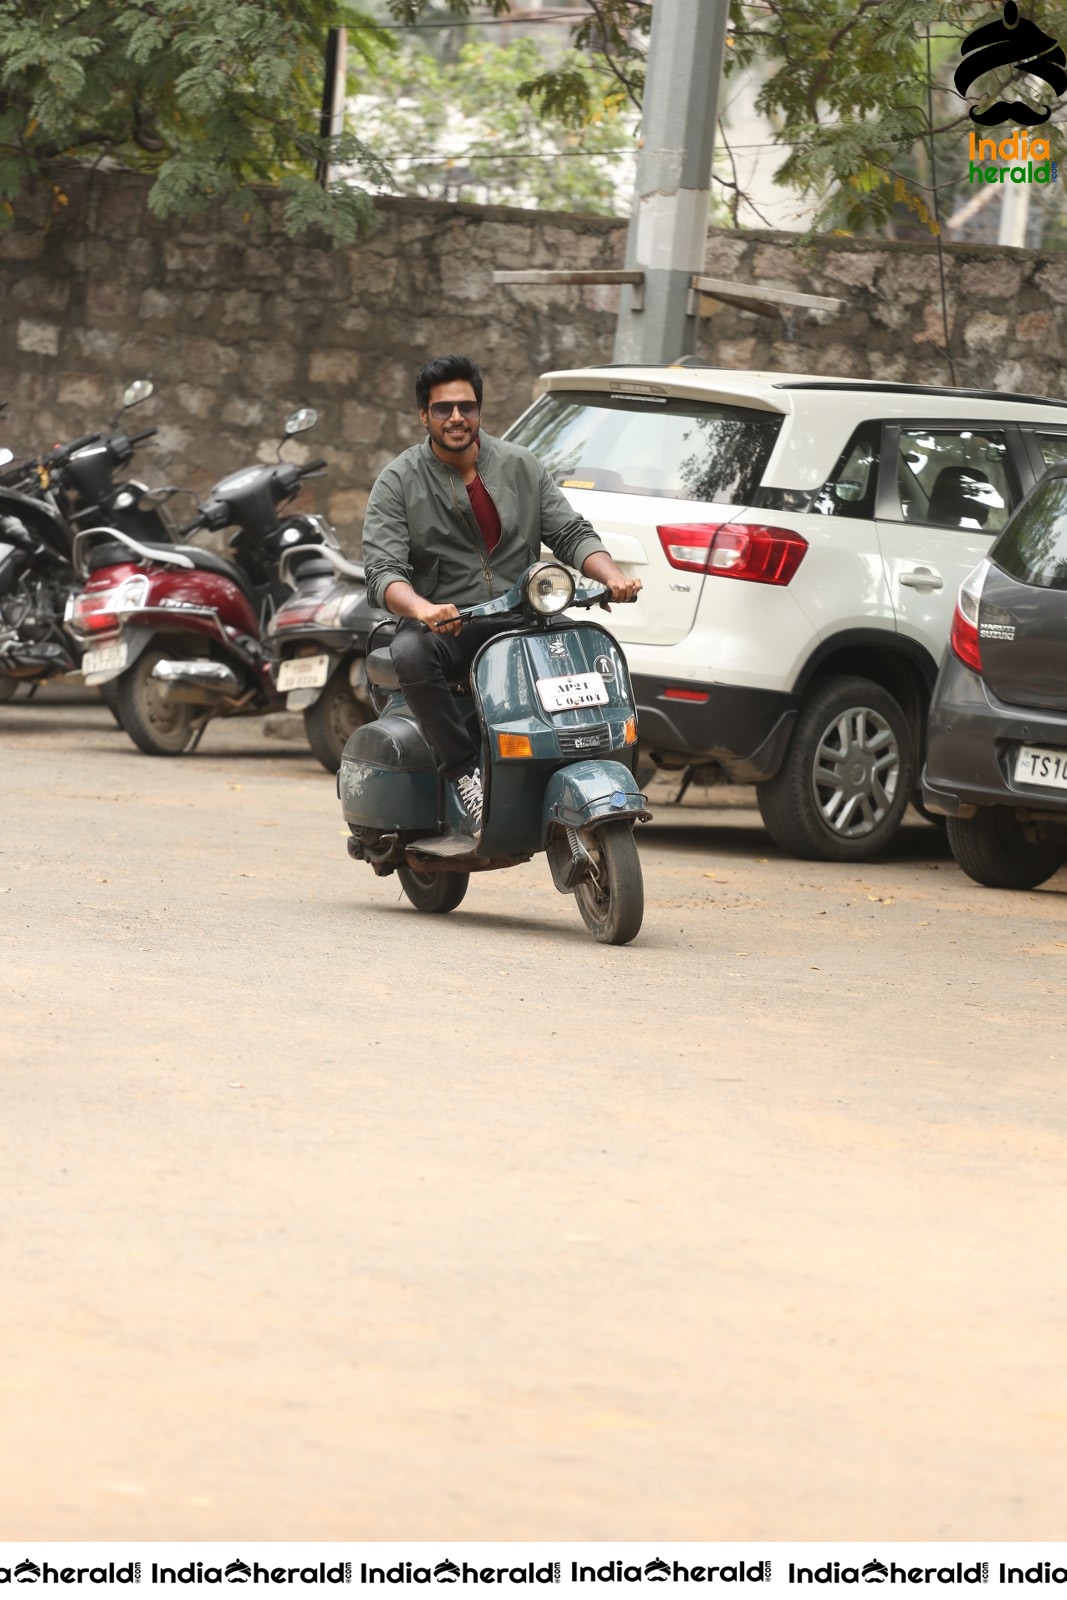 Actor Sundeep Kishan spotted while riding a scooter on the roads